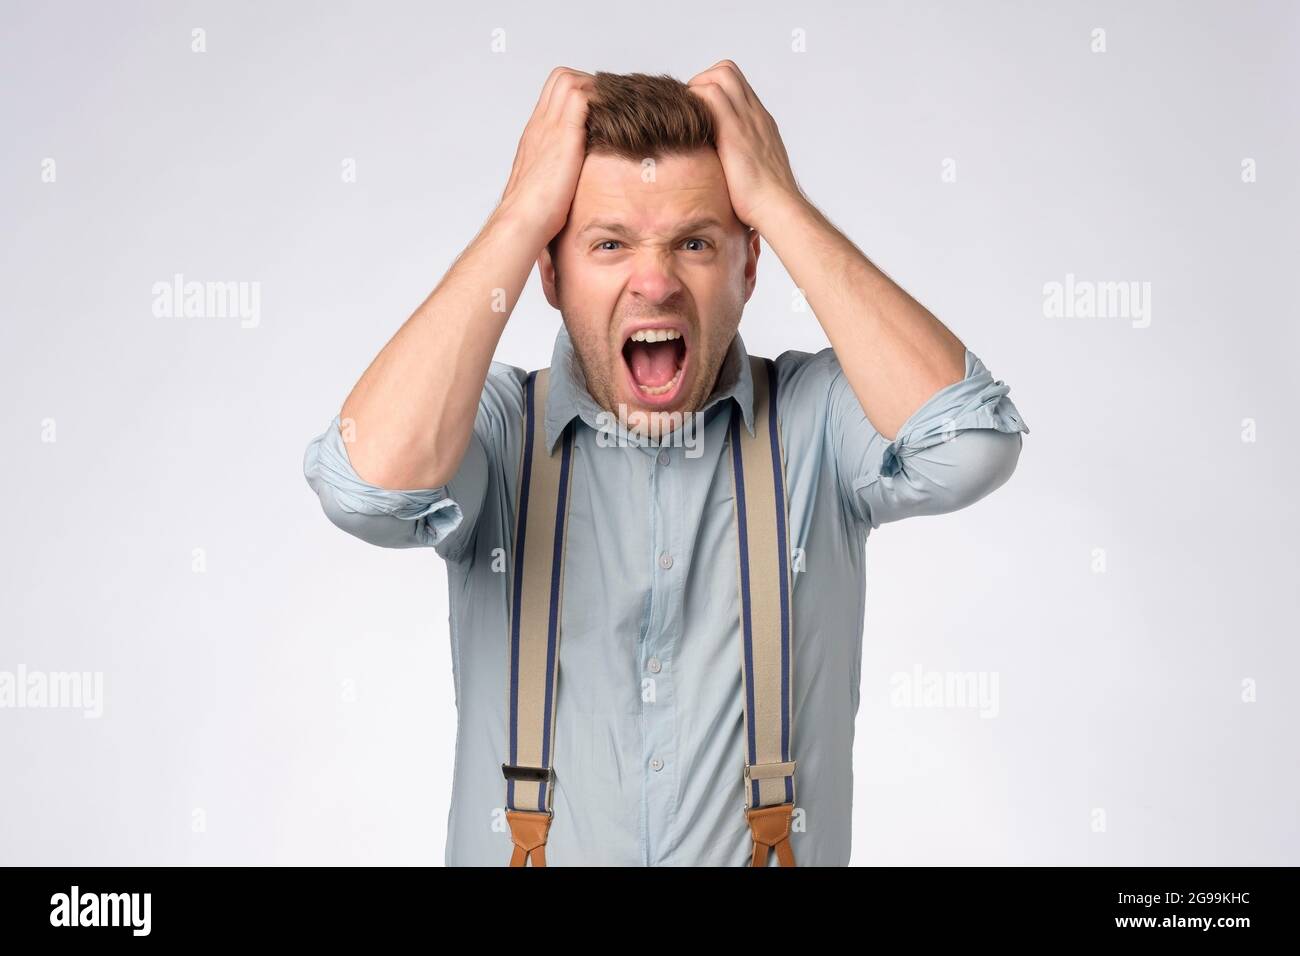 Shocked caucasian man shouting pulling out his hair. Stock Photo